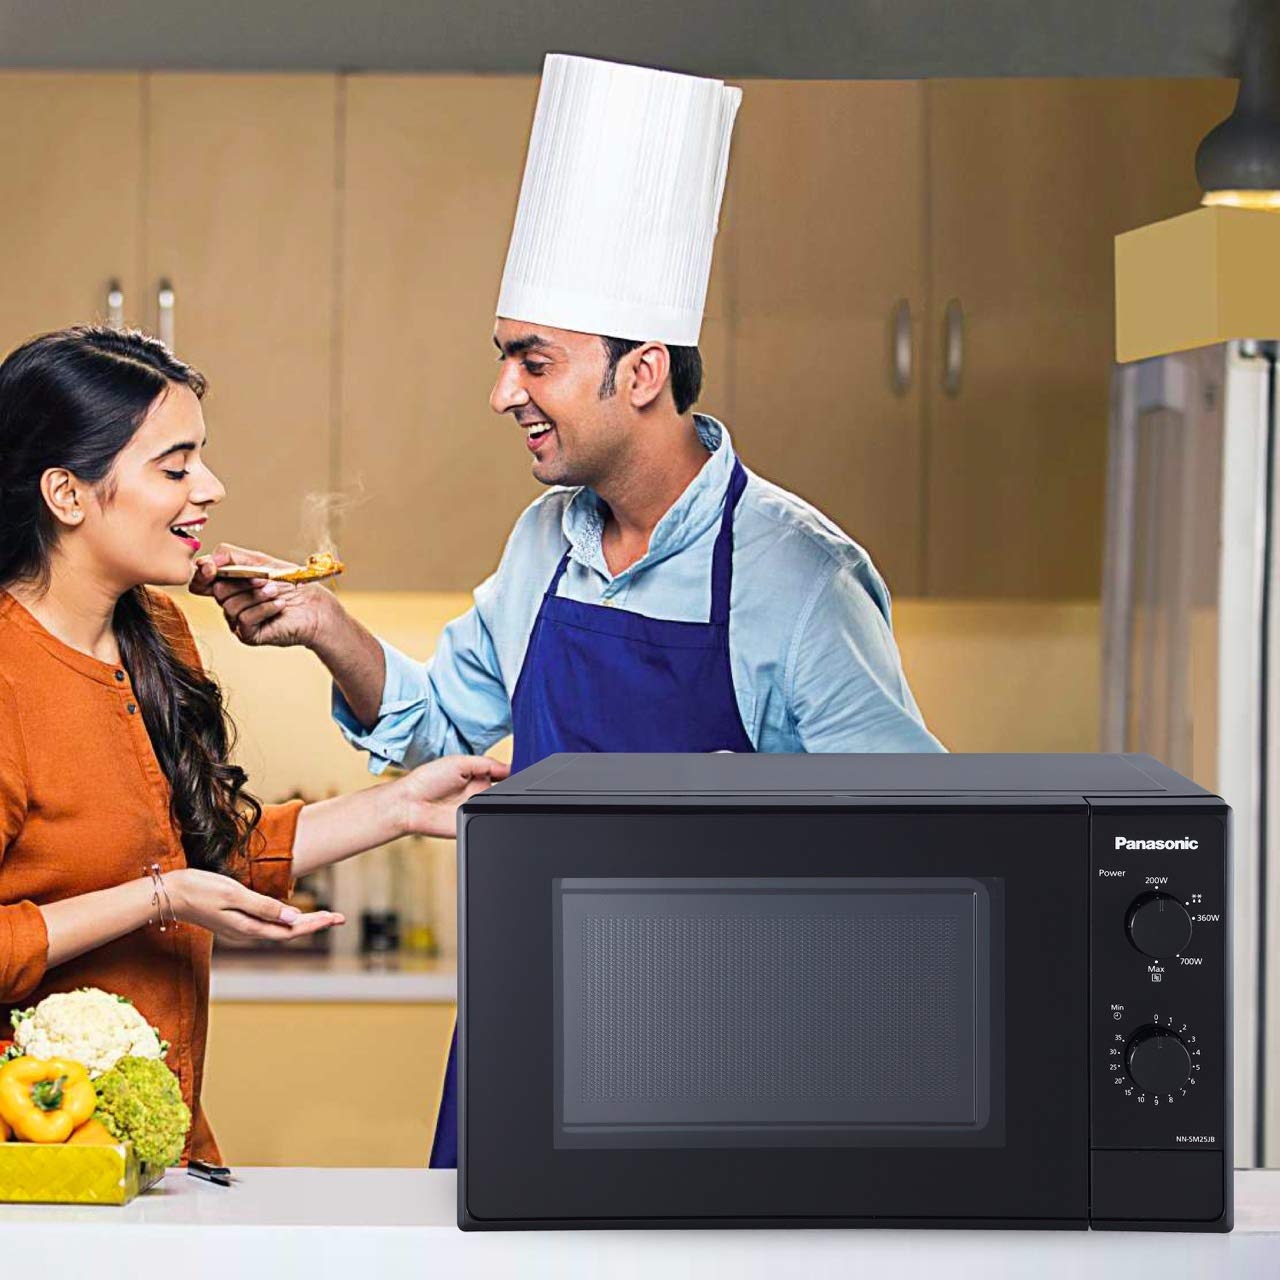 Best Amazonbasics Solo Microwave Ovens In India 2022!